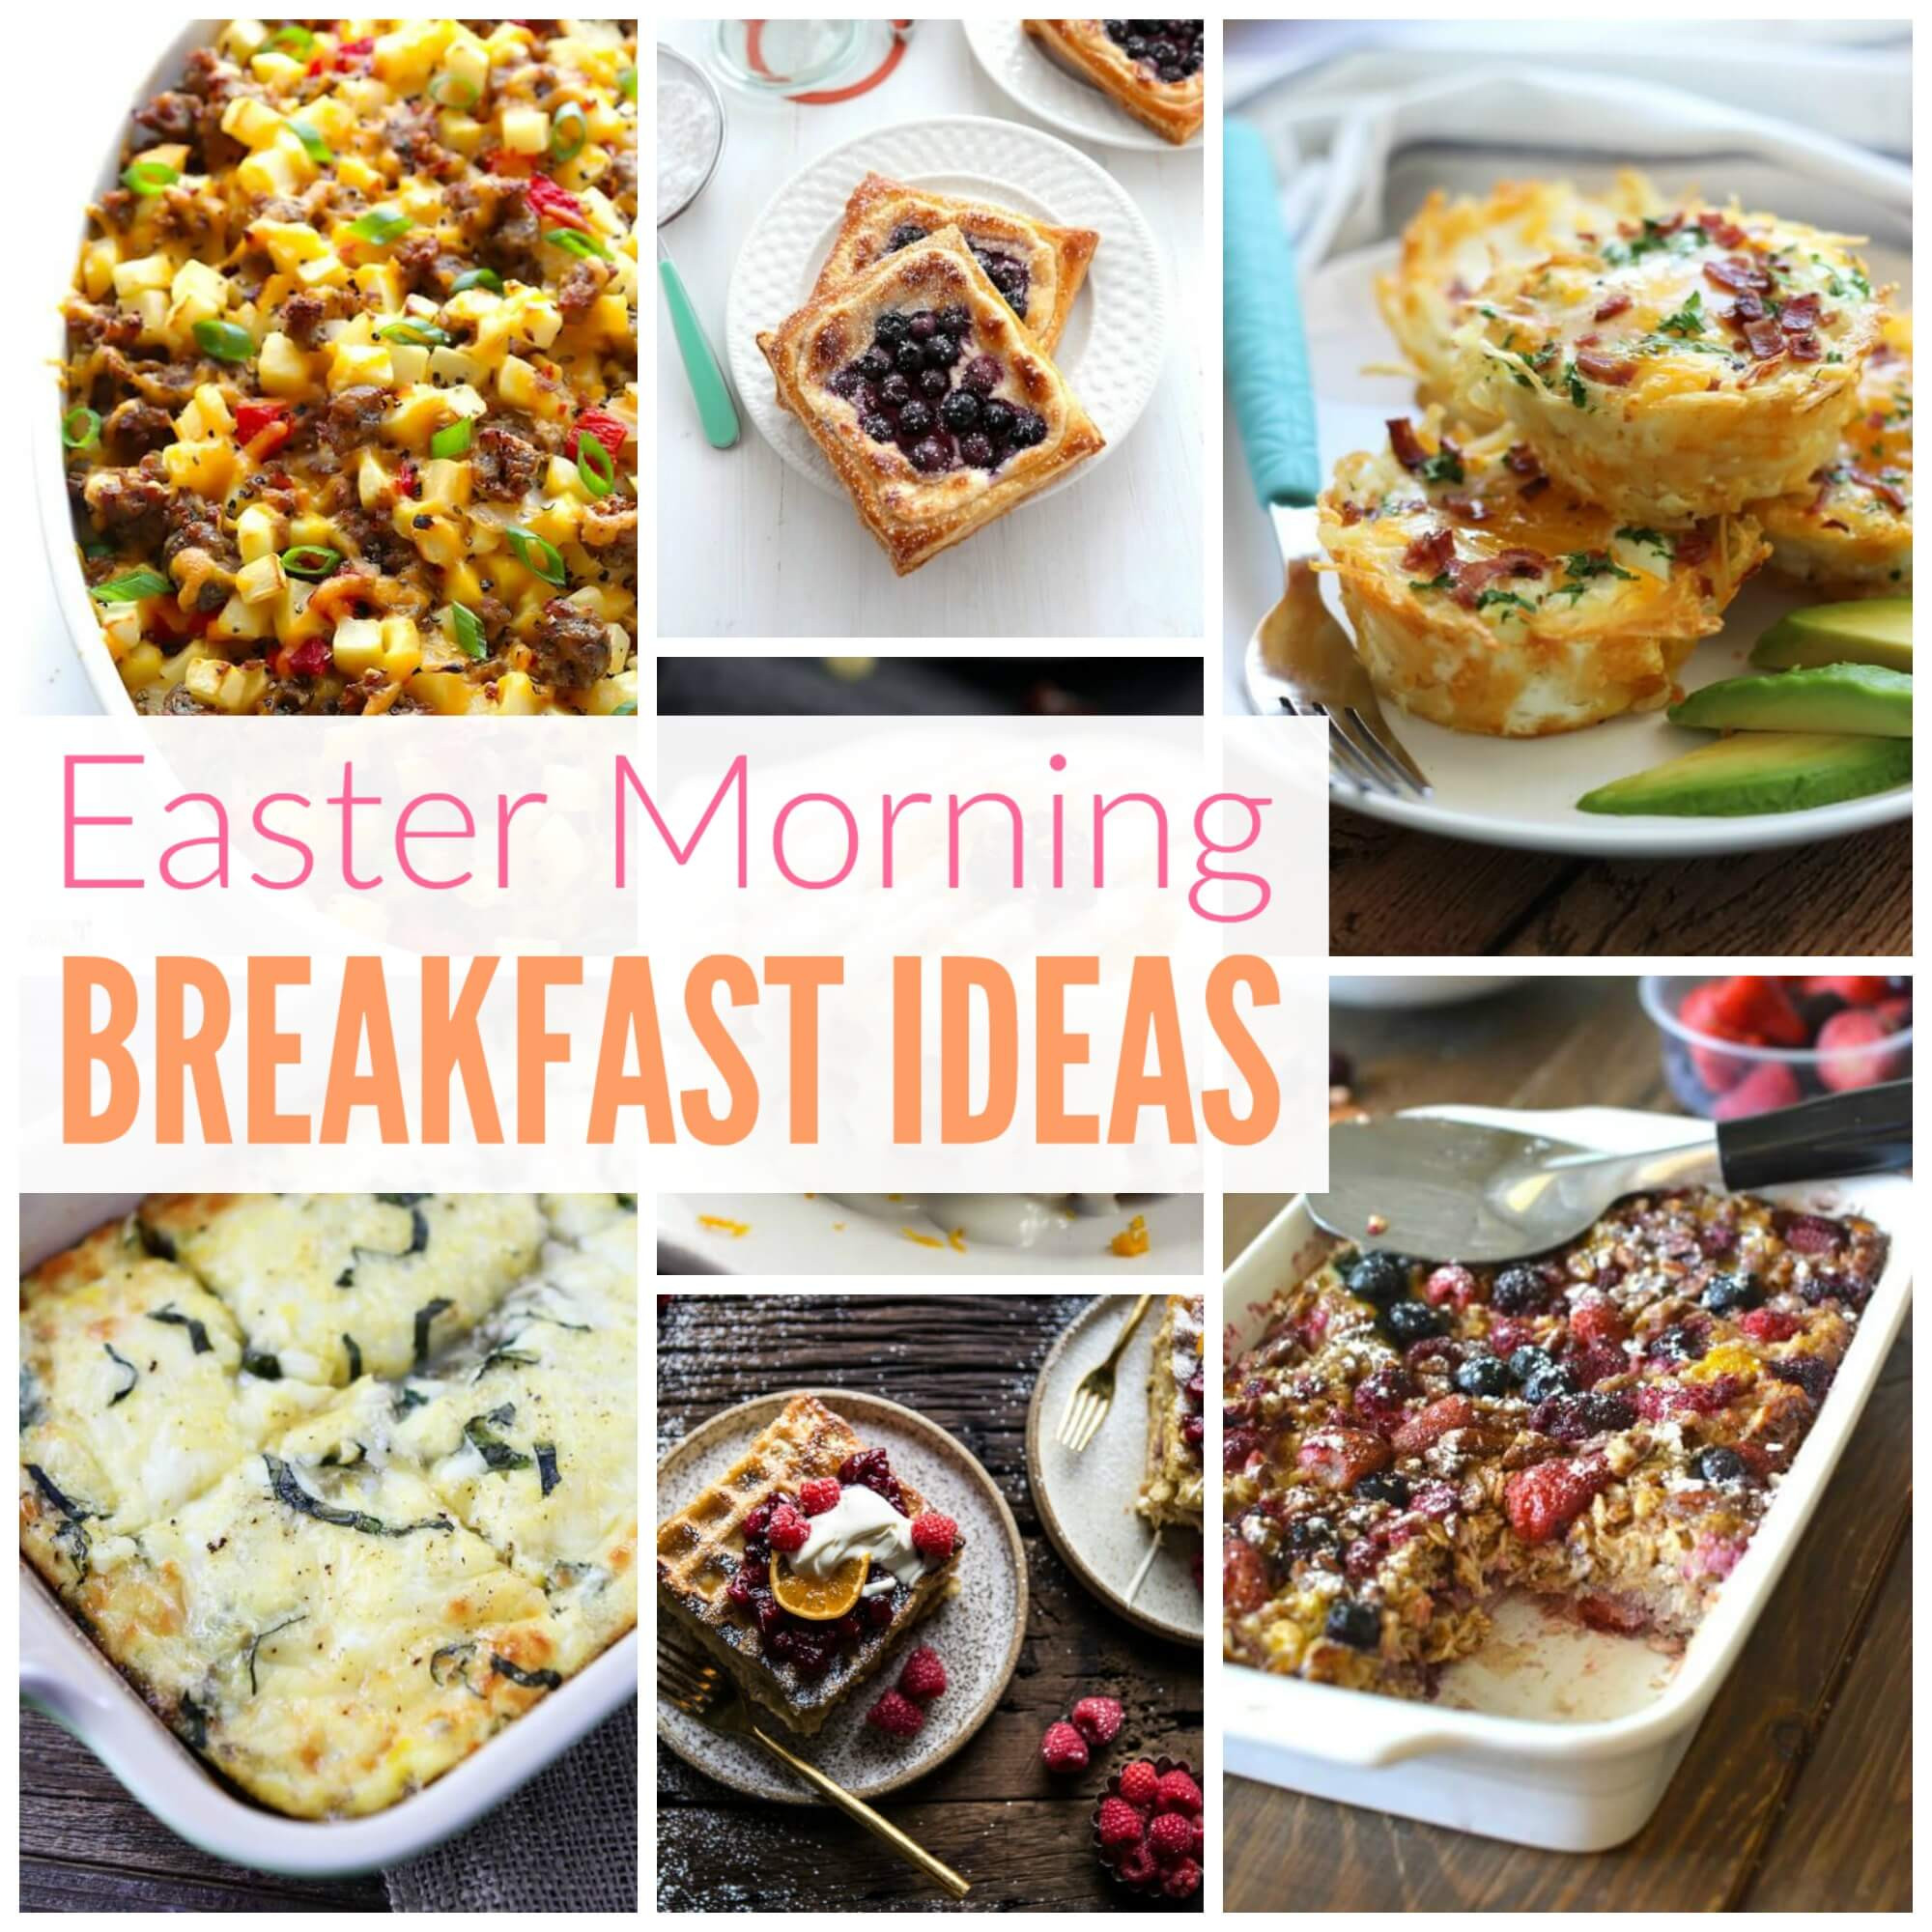 Easter Morning Ideas
 Easter Breakfast Ideas and Brunch Recipes